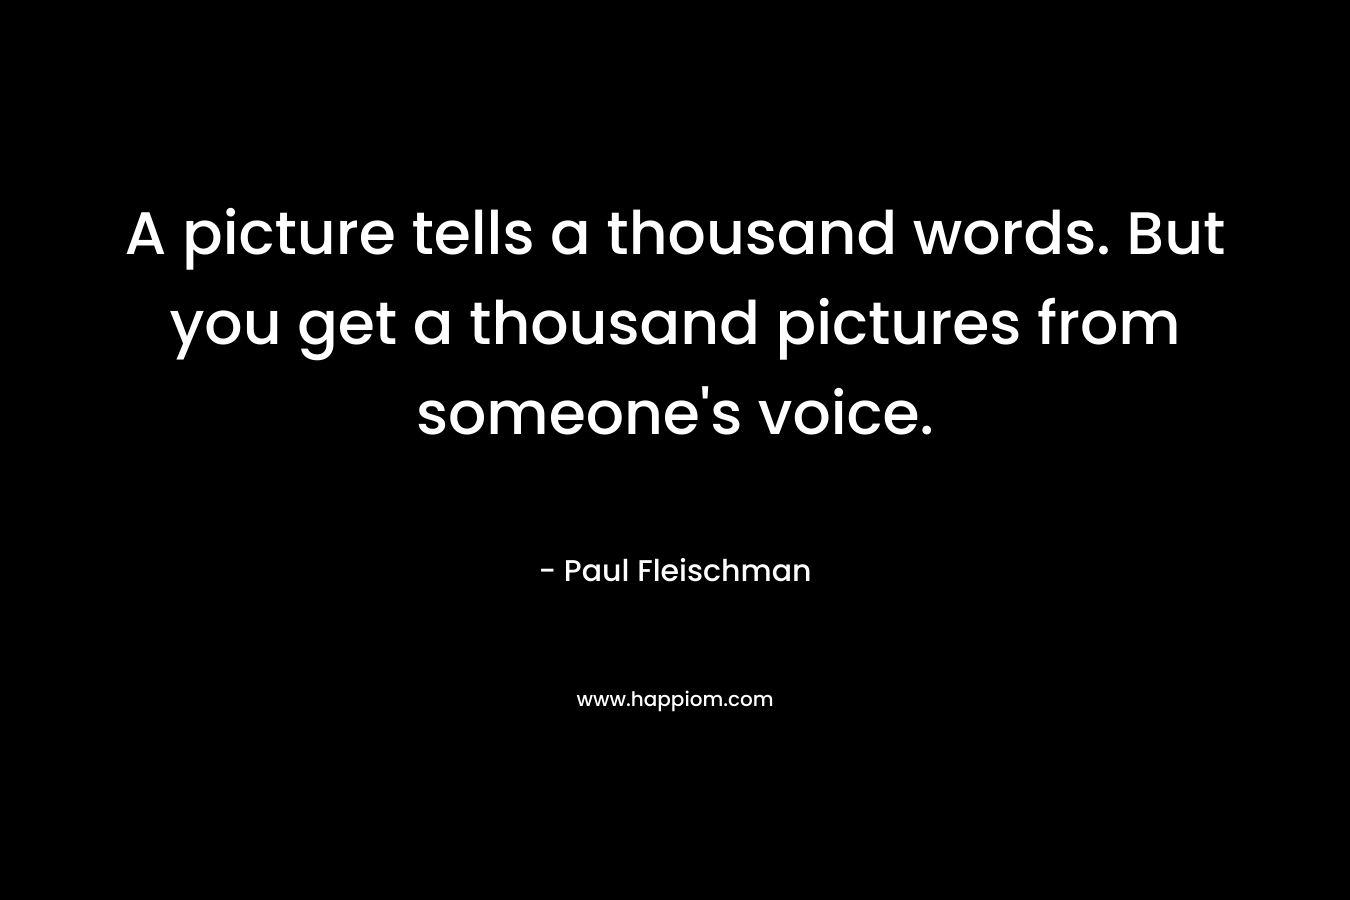 A picture tells a thousand words. But you get a thousand pictures from someone’s voice. – Paul Fleischman